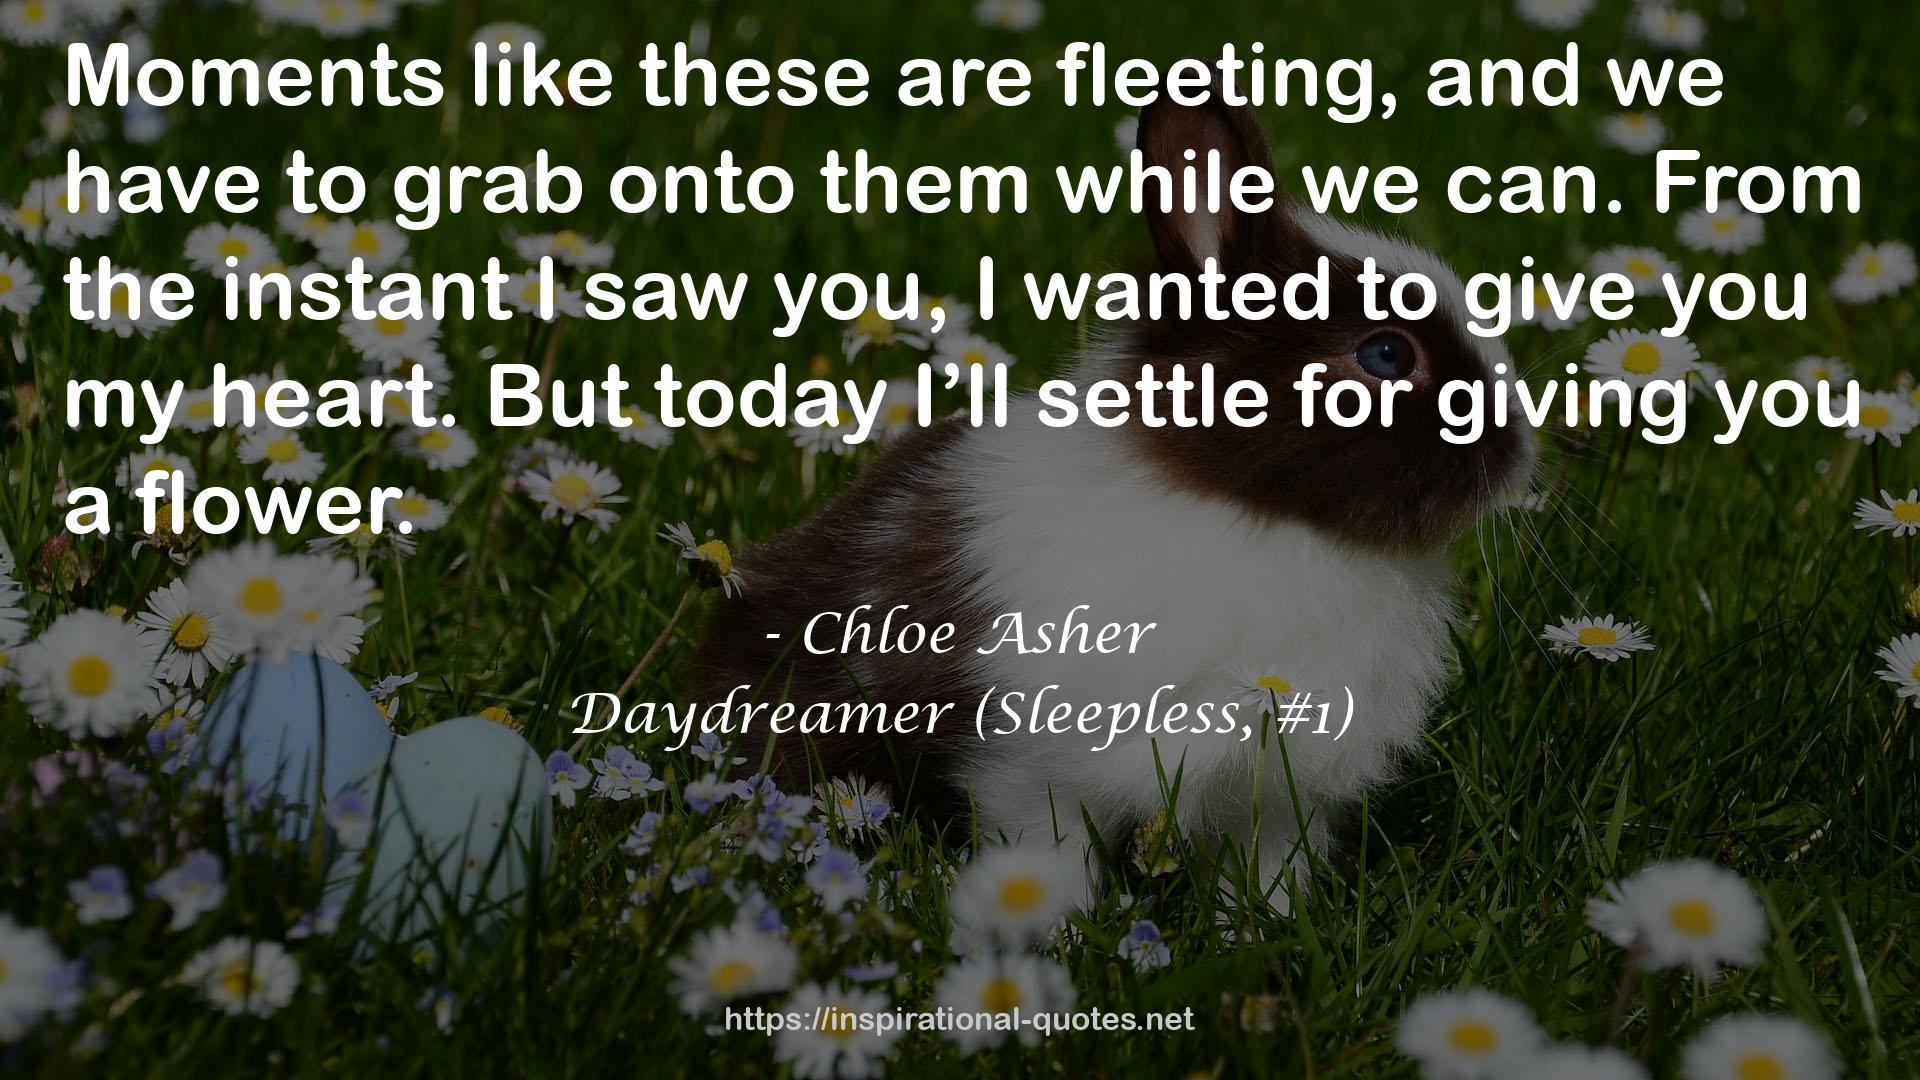 Daydreamer (Sleepless, #1) QUOTES